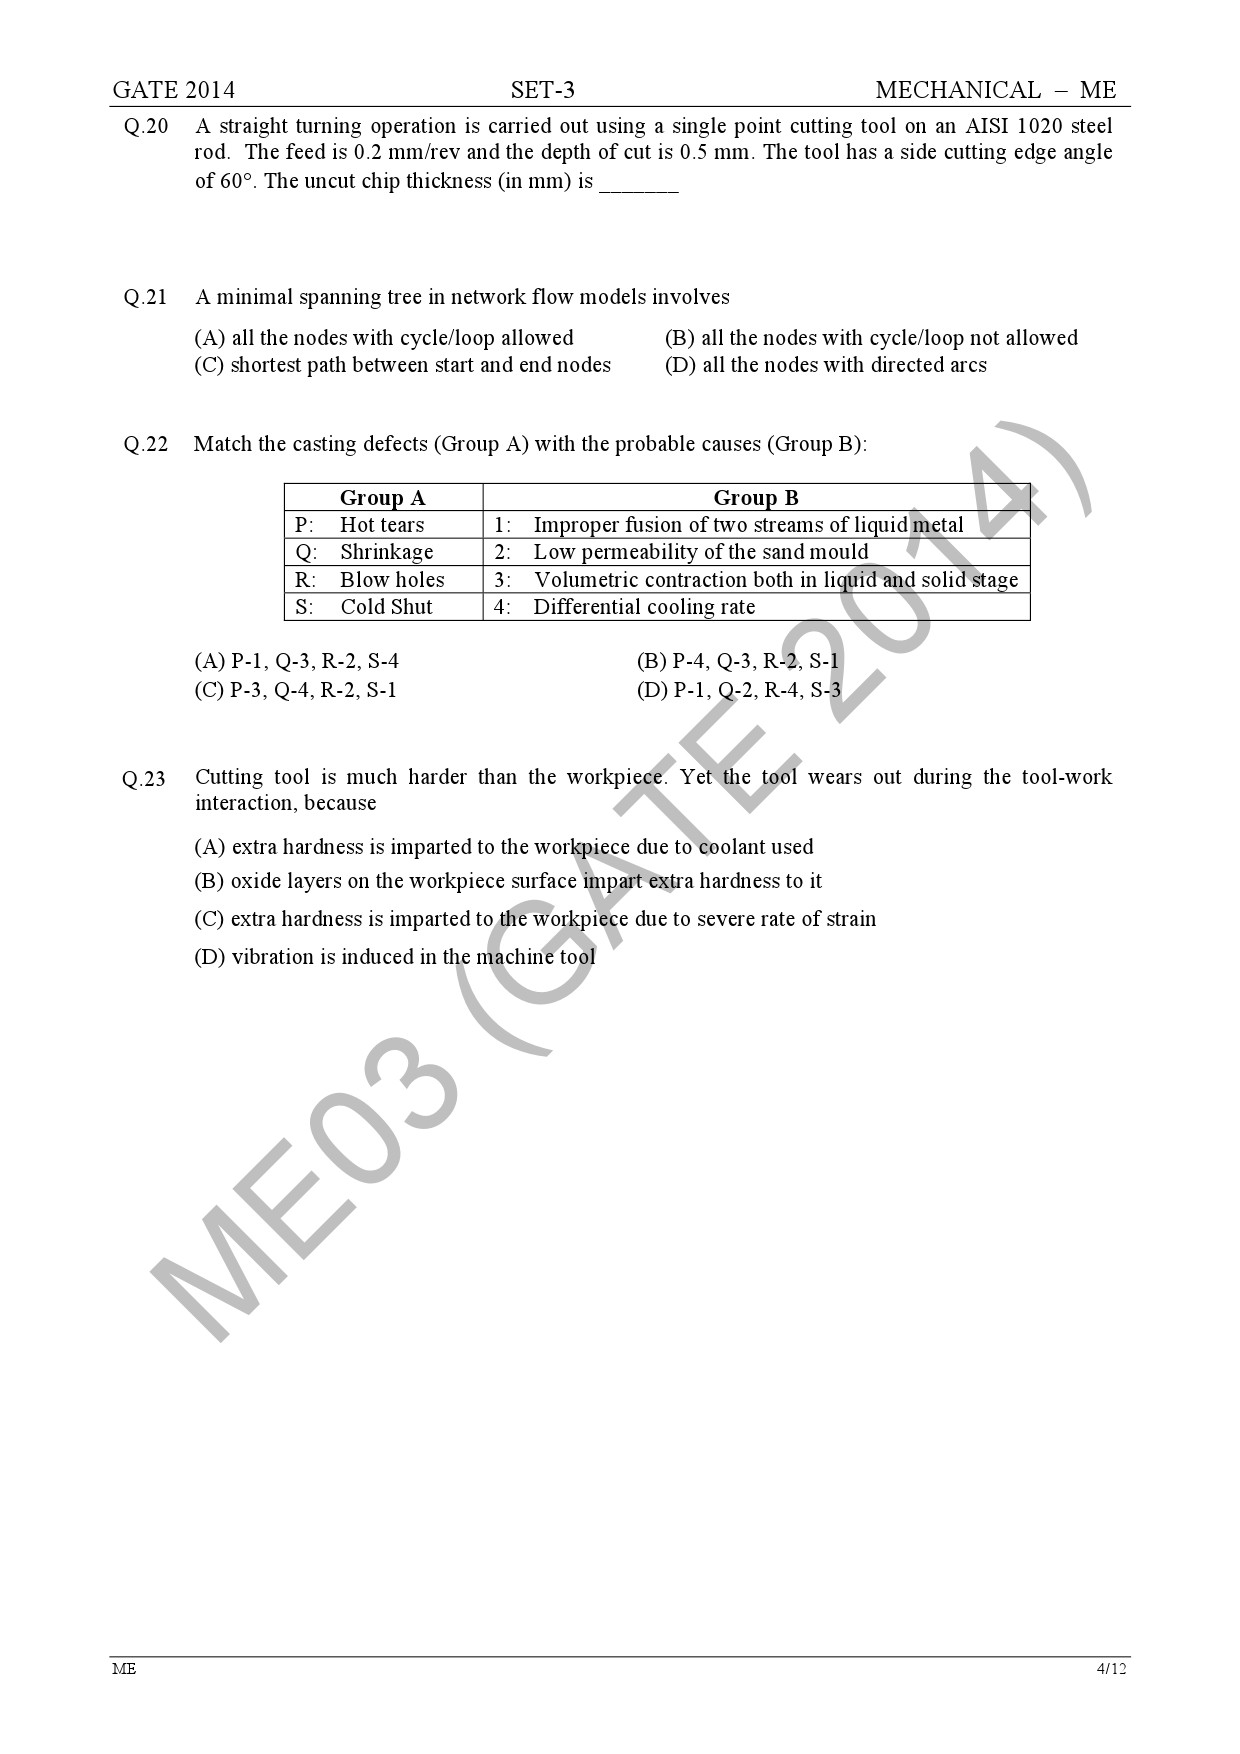 GATE Exam Question Paper 2014 Mechanical Engineering Set 3 11